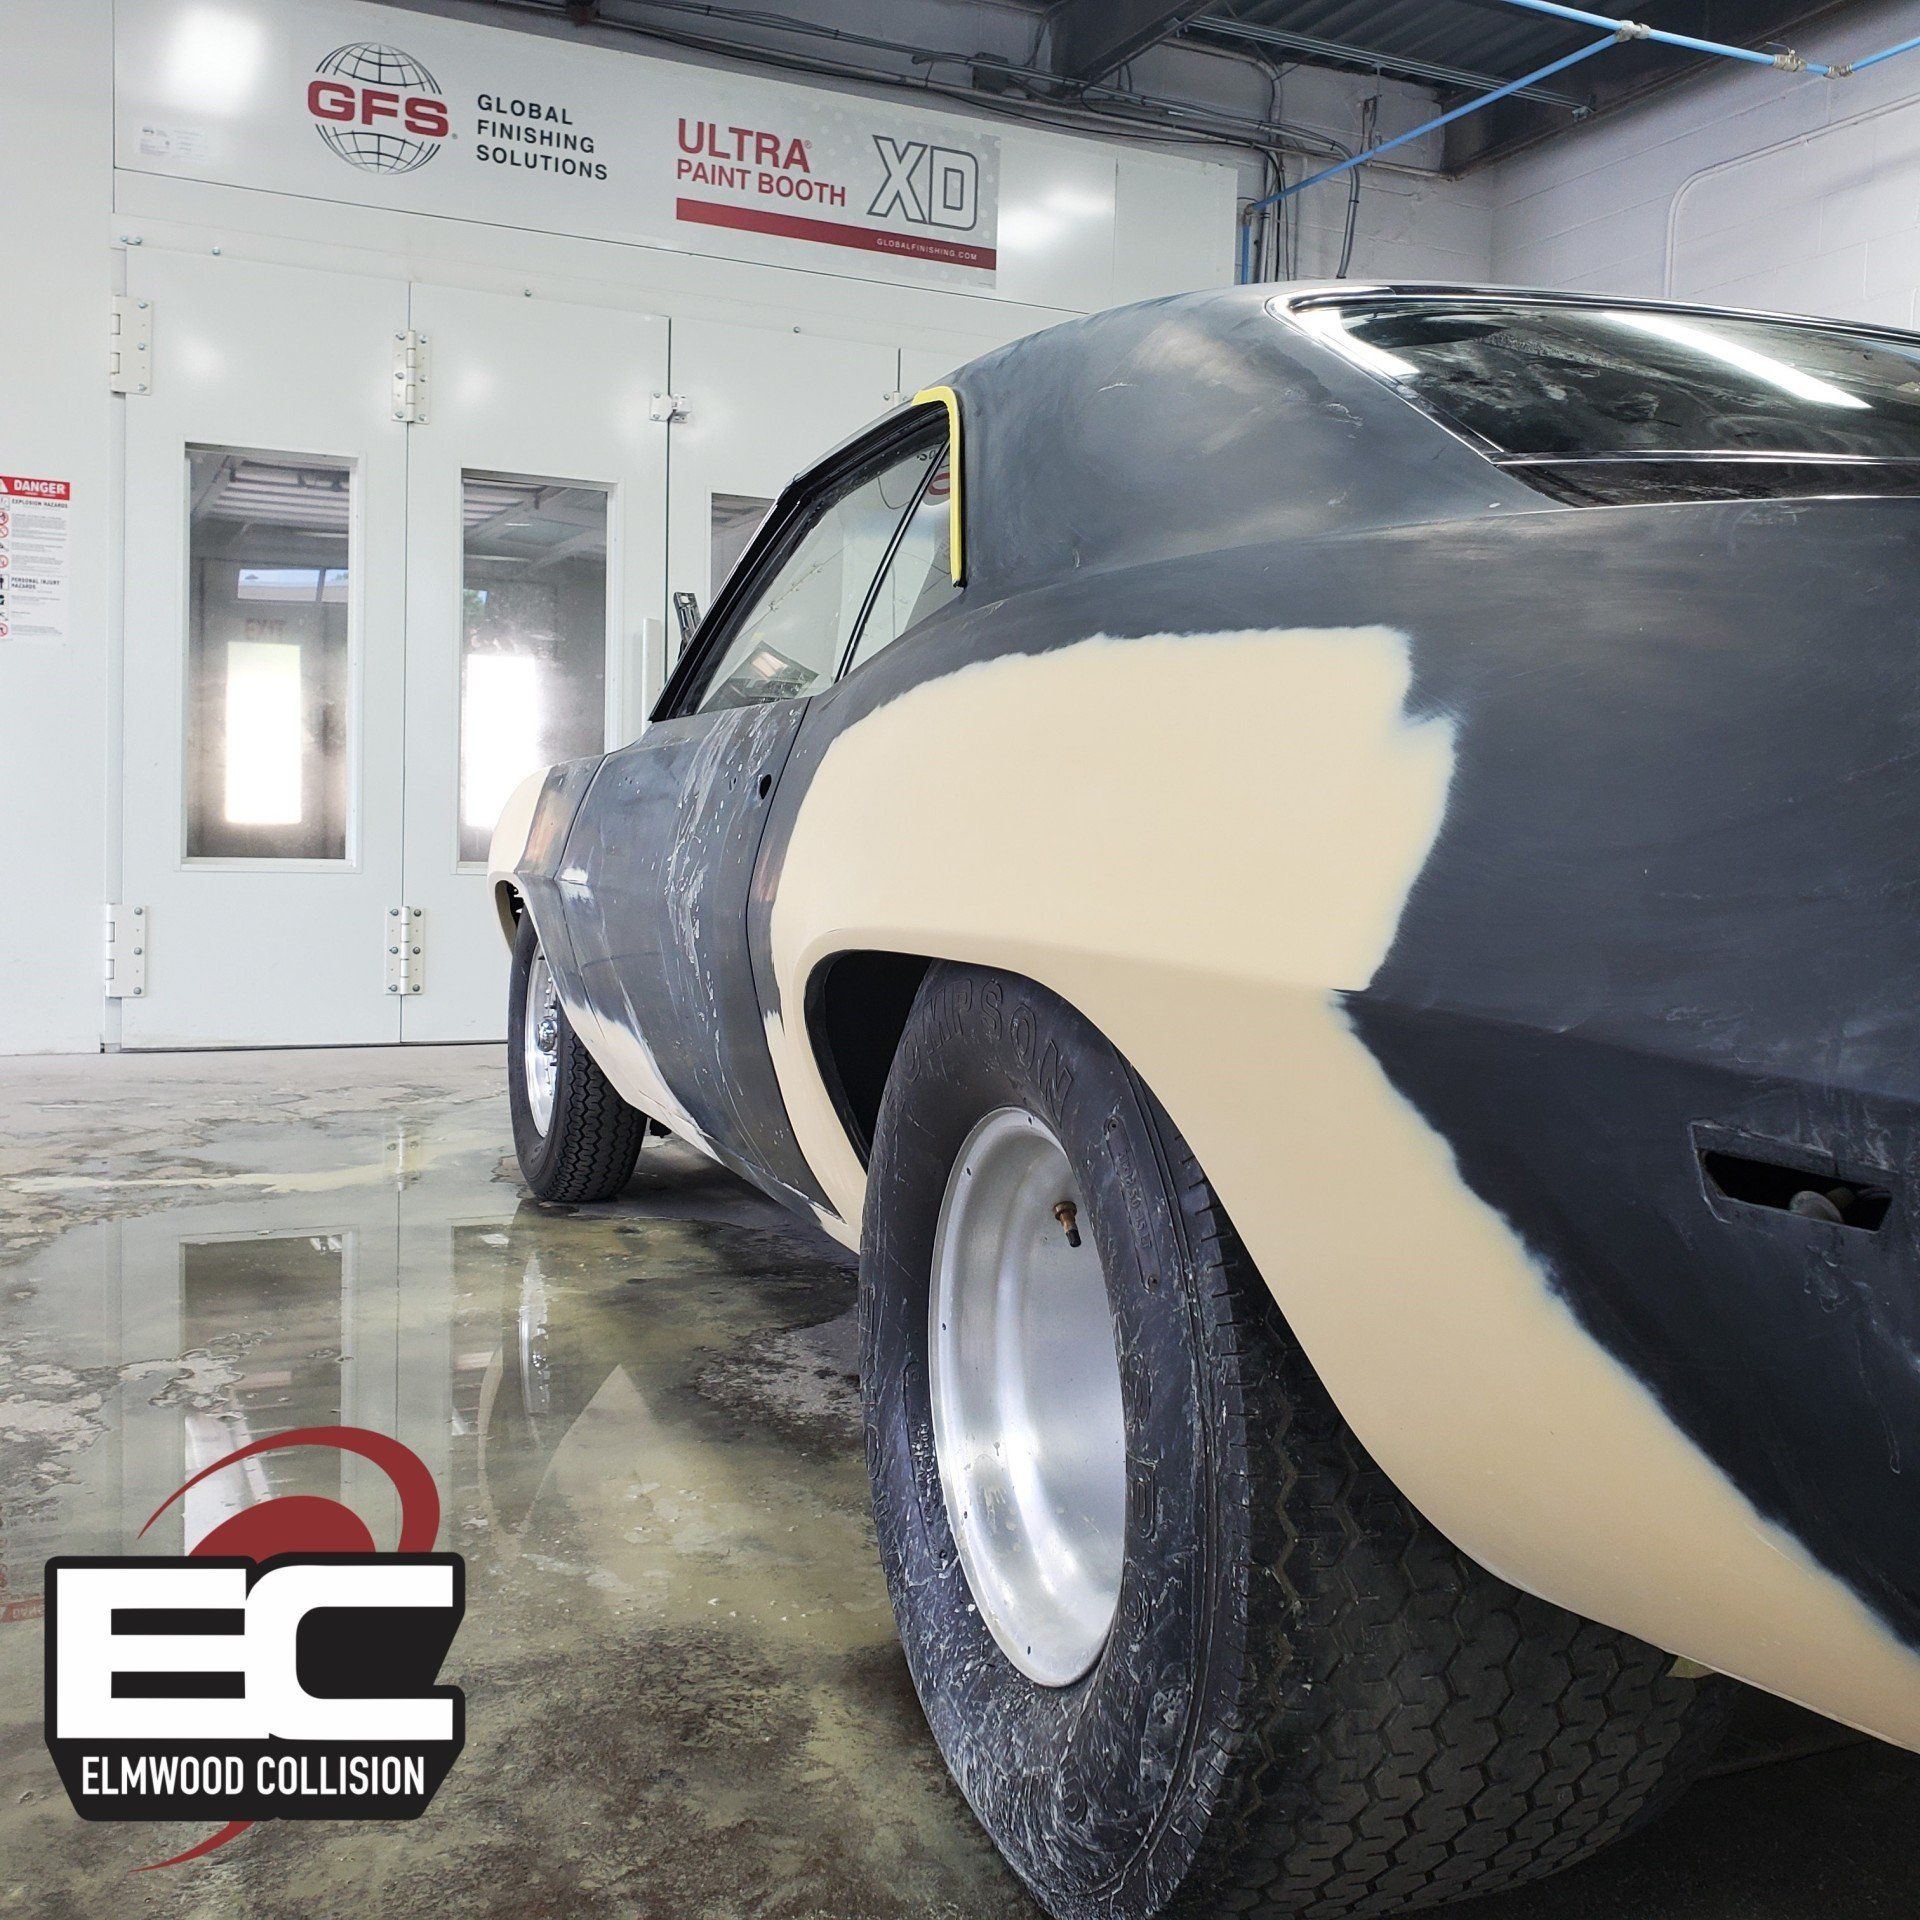 Left Quarter Panel on 1969 Camaro with body work and primer